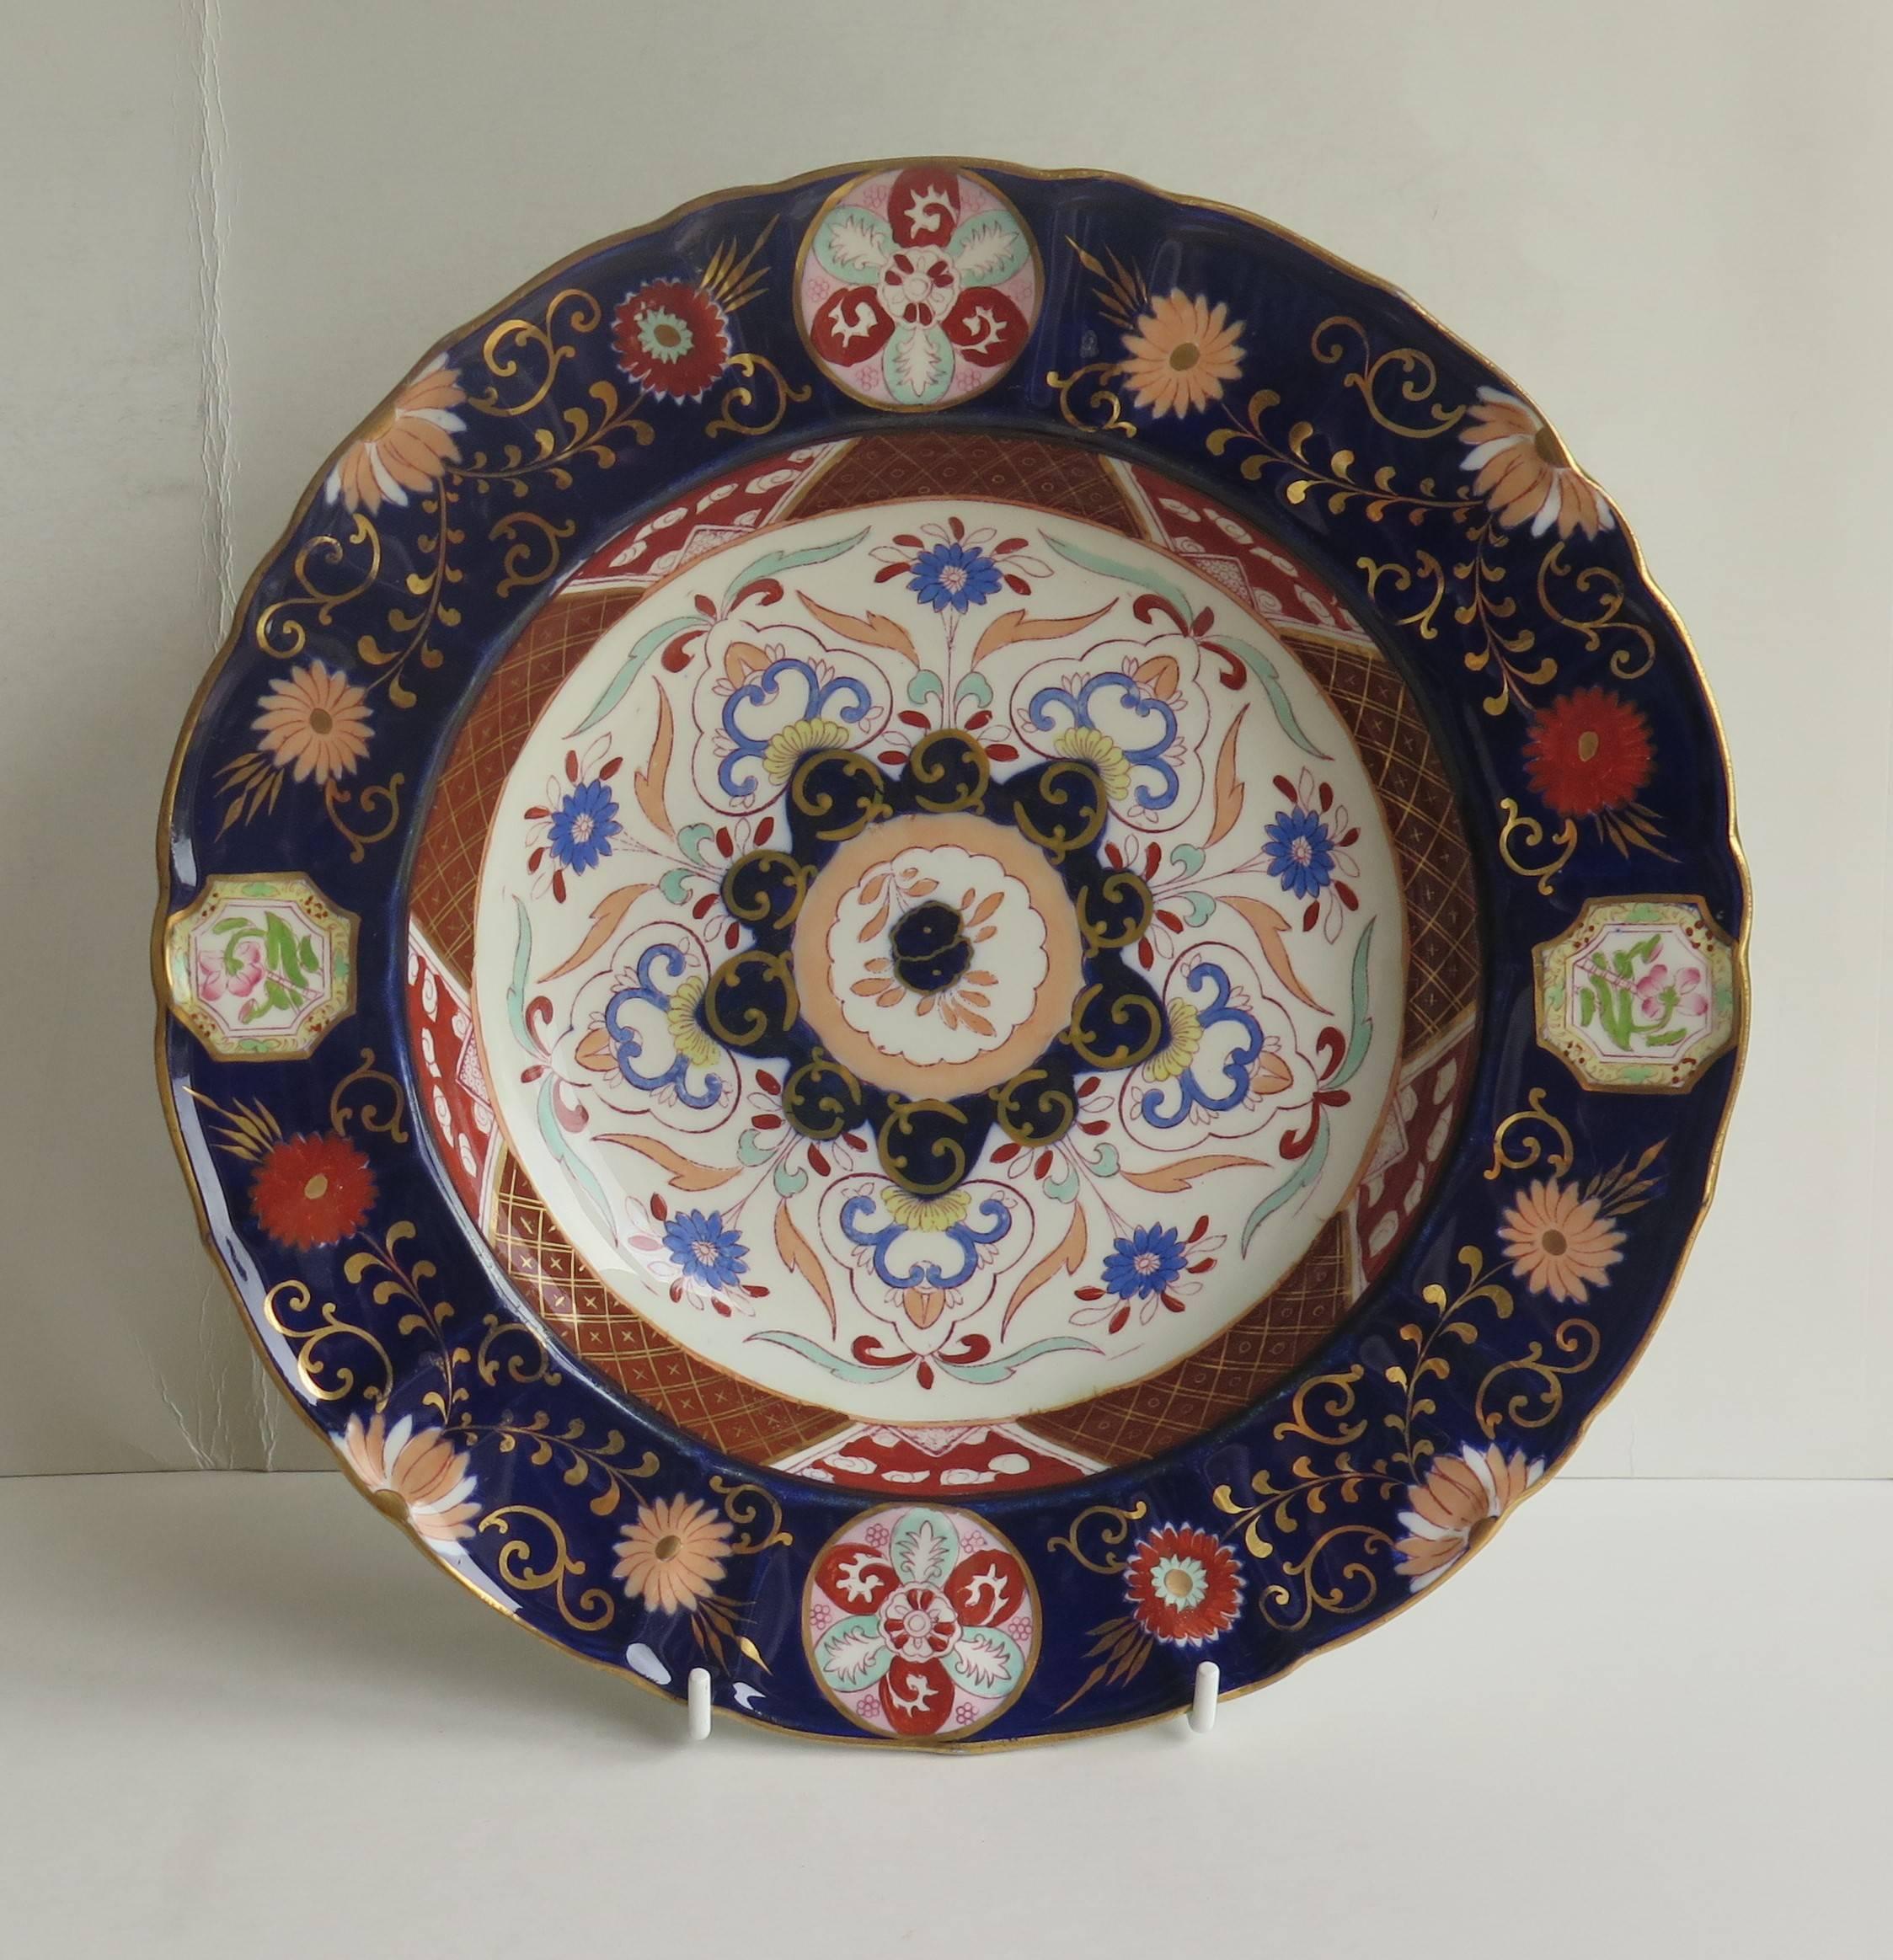 This is a mid-19th century Mason’s ironstone plate or bowl produced at the time when Mason's was owned and controlled by George L Ashworth after the bankruptcy of C J Mason in 1848.

This large bowl/plate is decorated in a striking chinoiserie